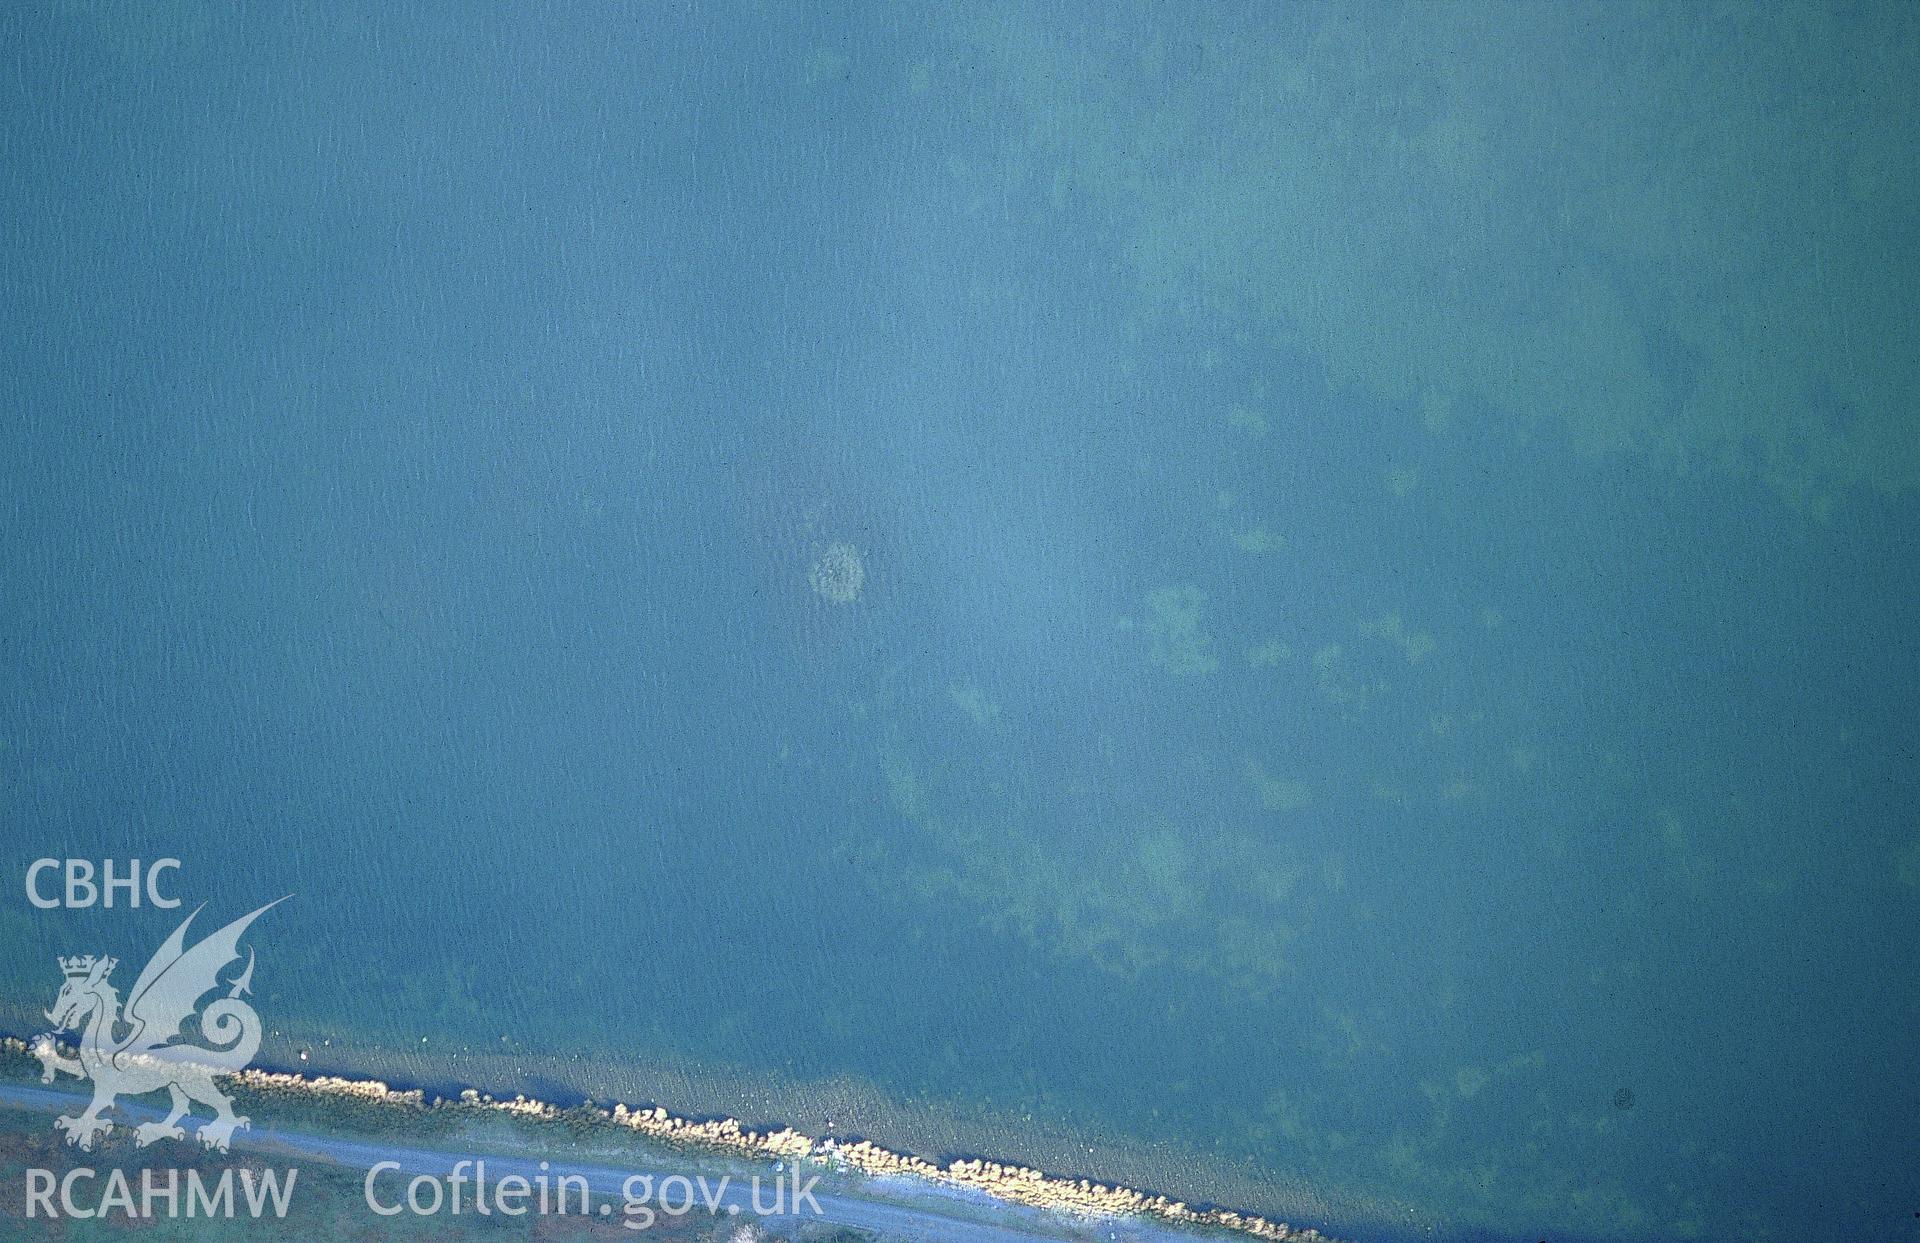 RCAHMW colour slide oblique aerial photograph of Tal-y-llyn Lake, Llanfihangel-y-pennant, taken on 17/03/1999 by Toby Driver